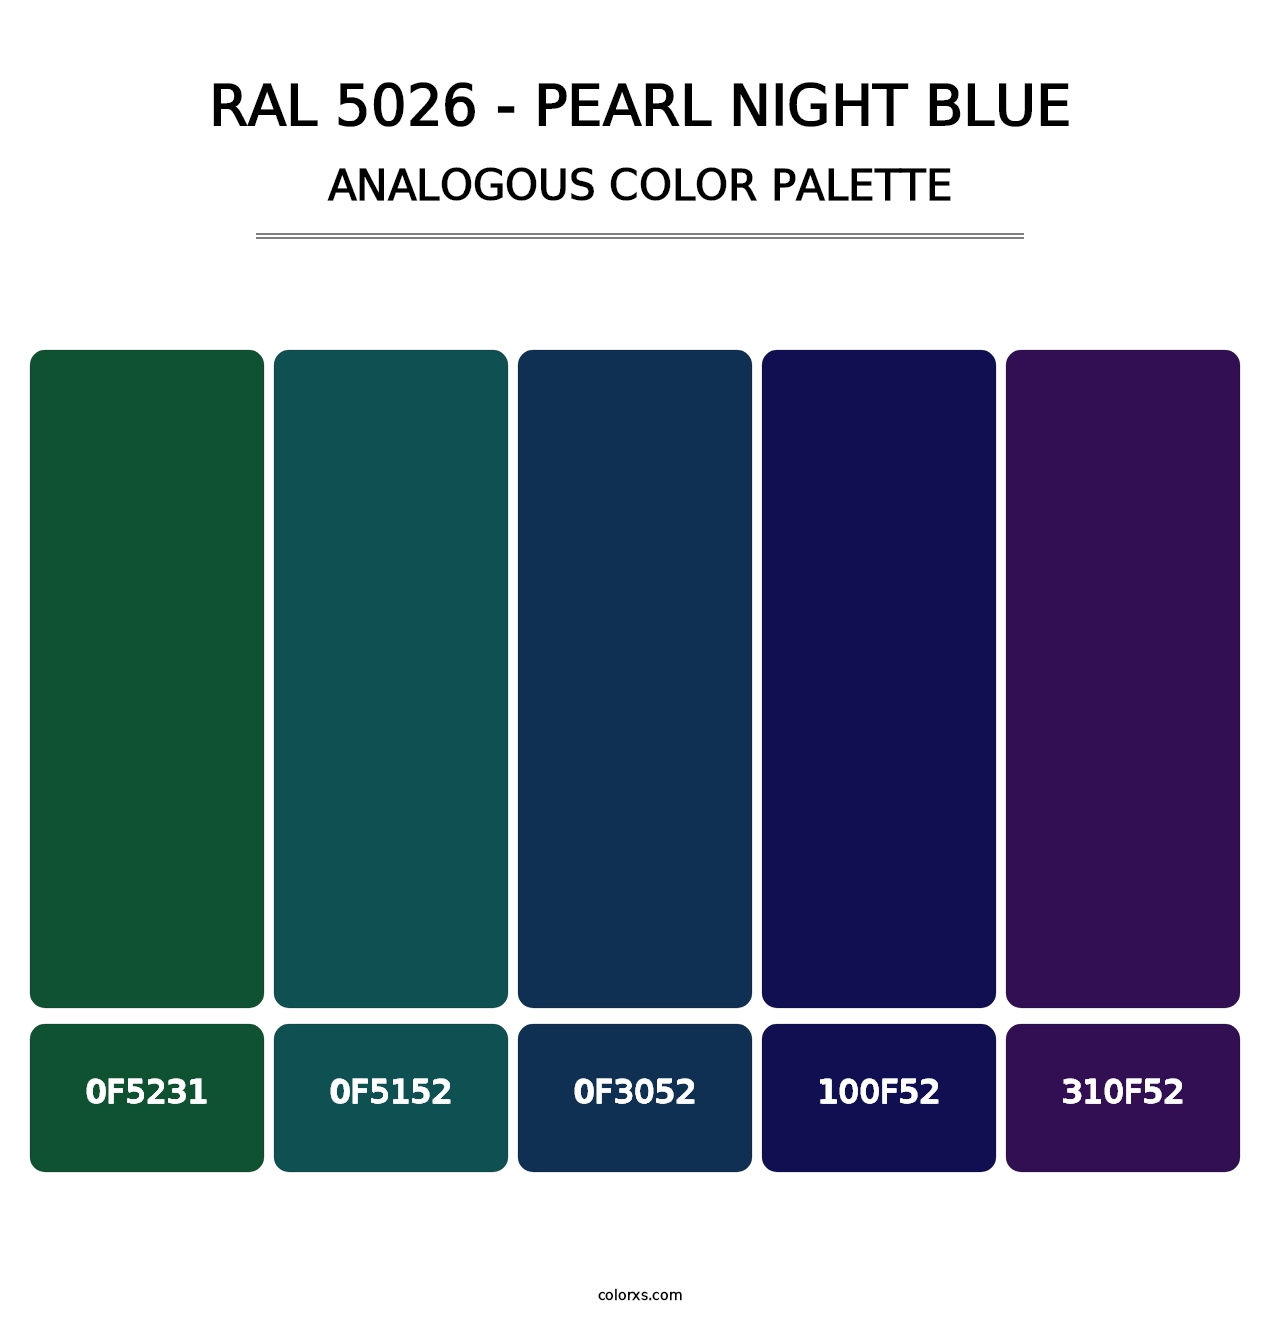 RAL 5026 - Pearl Night Blue - Analogous Color Palette